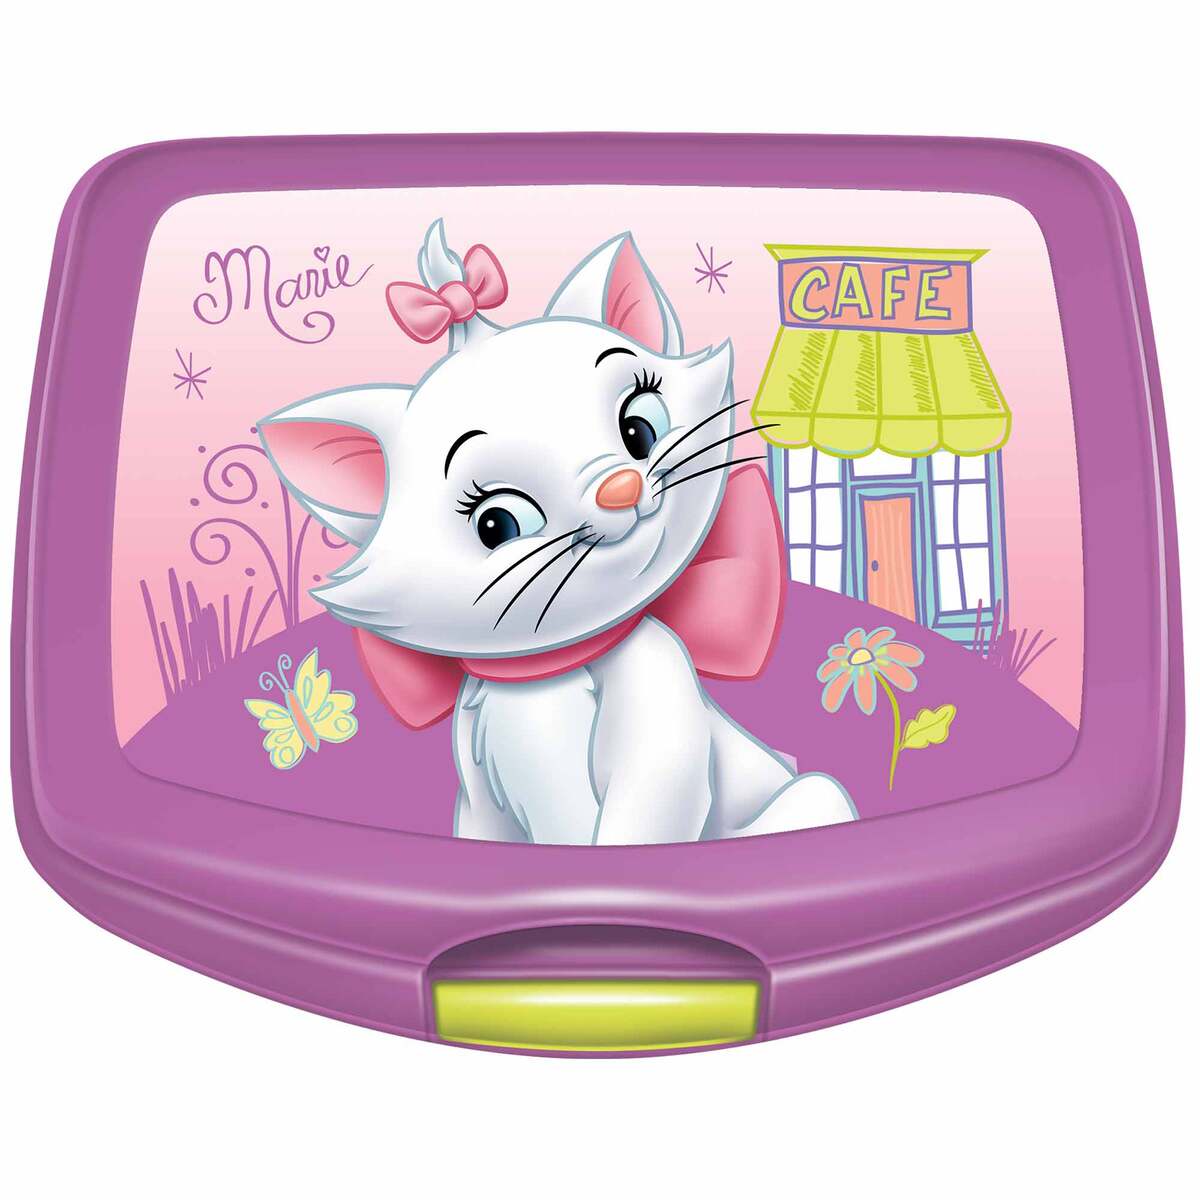 Marie Lunch Box 112-30-2102